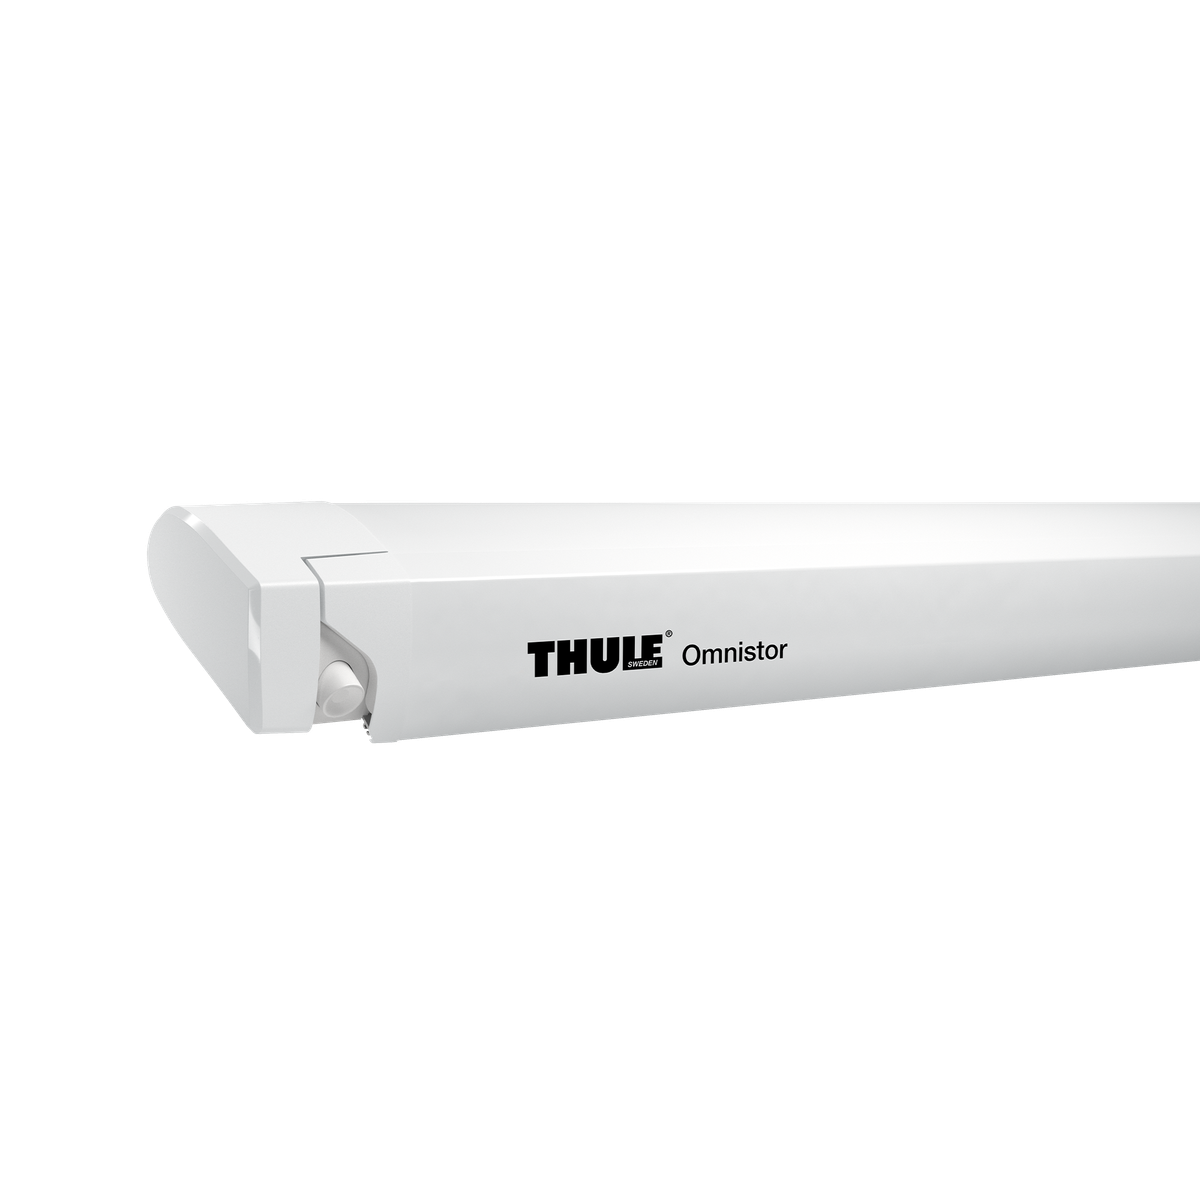 Thule Omnistor 6300 motorized roof awning 5.03x2.50 white